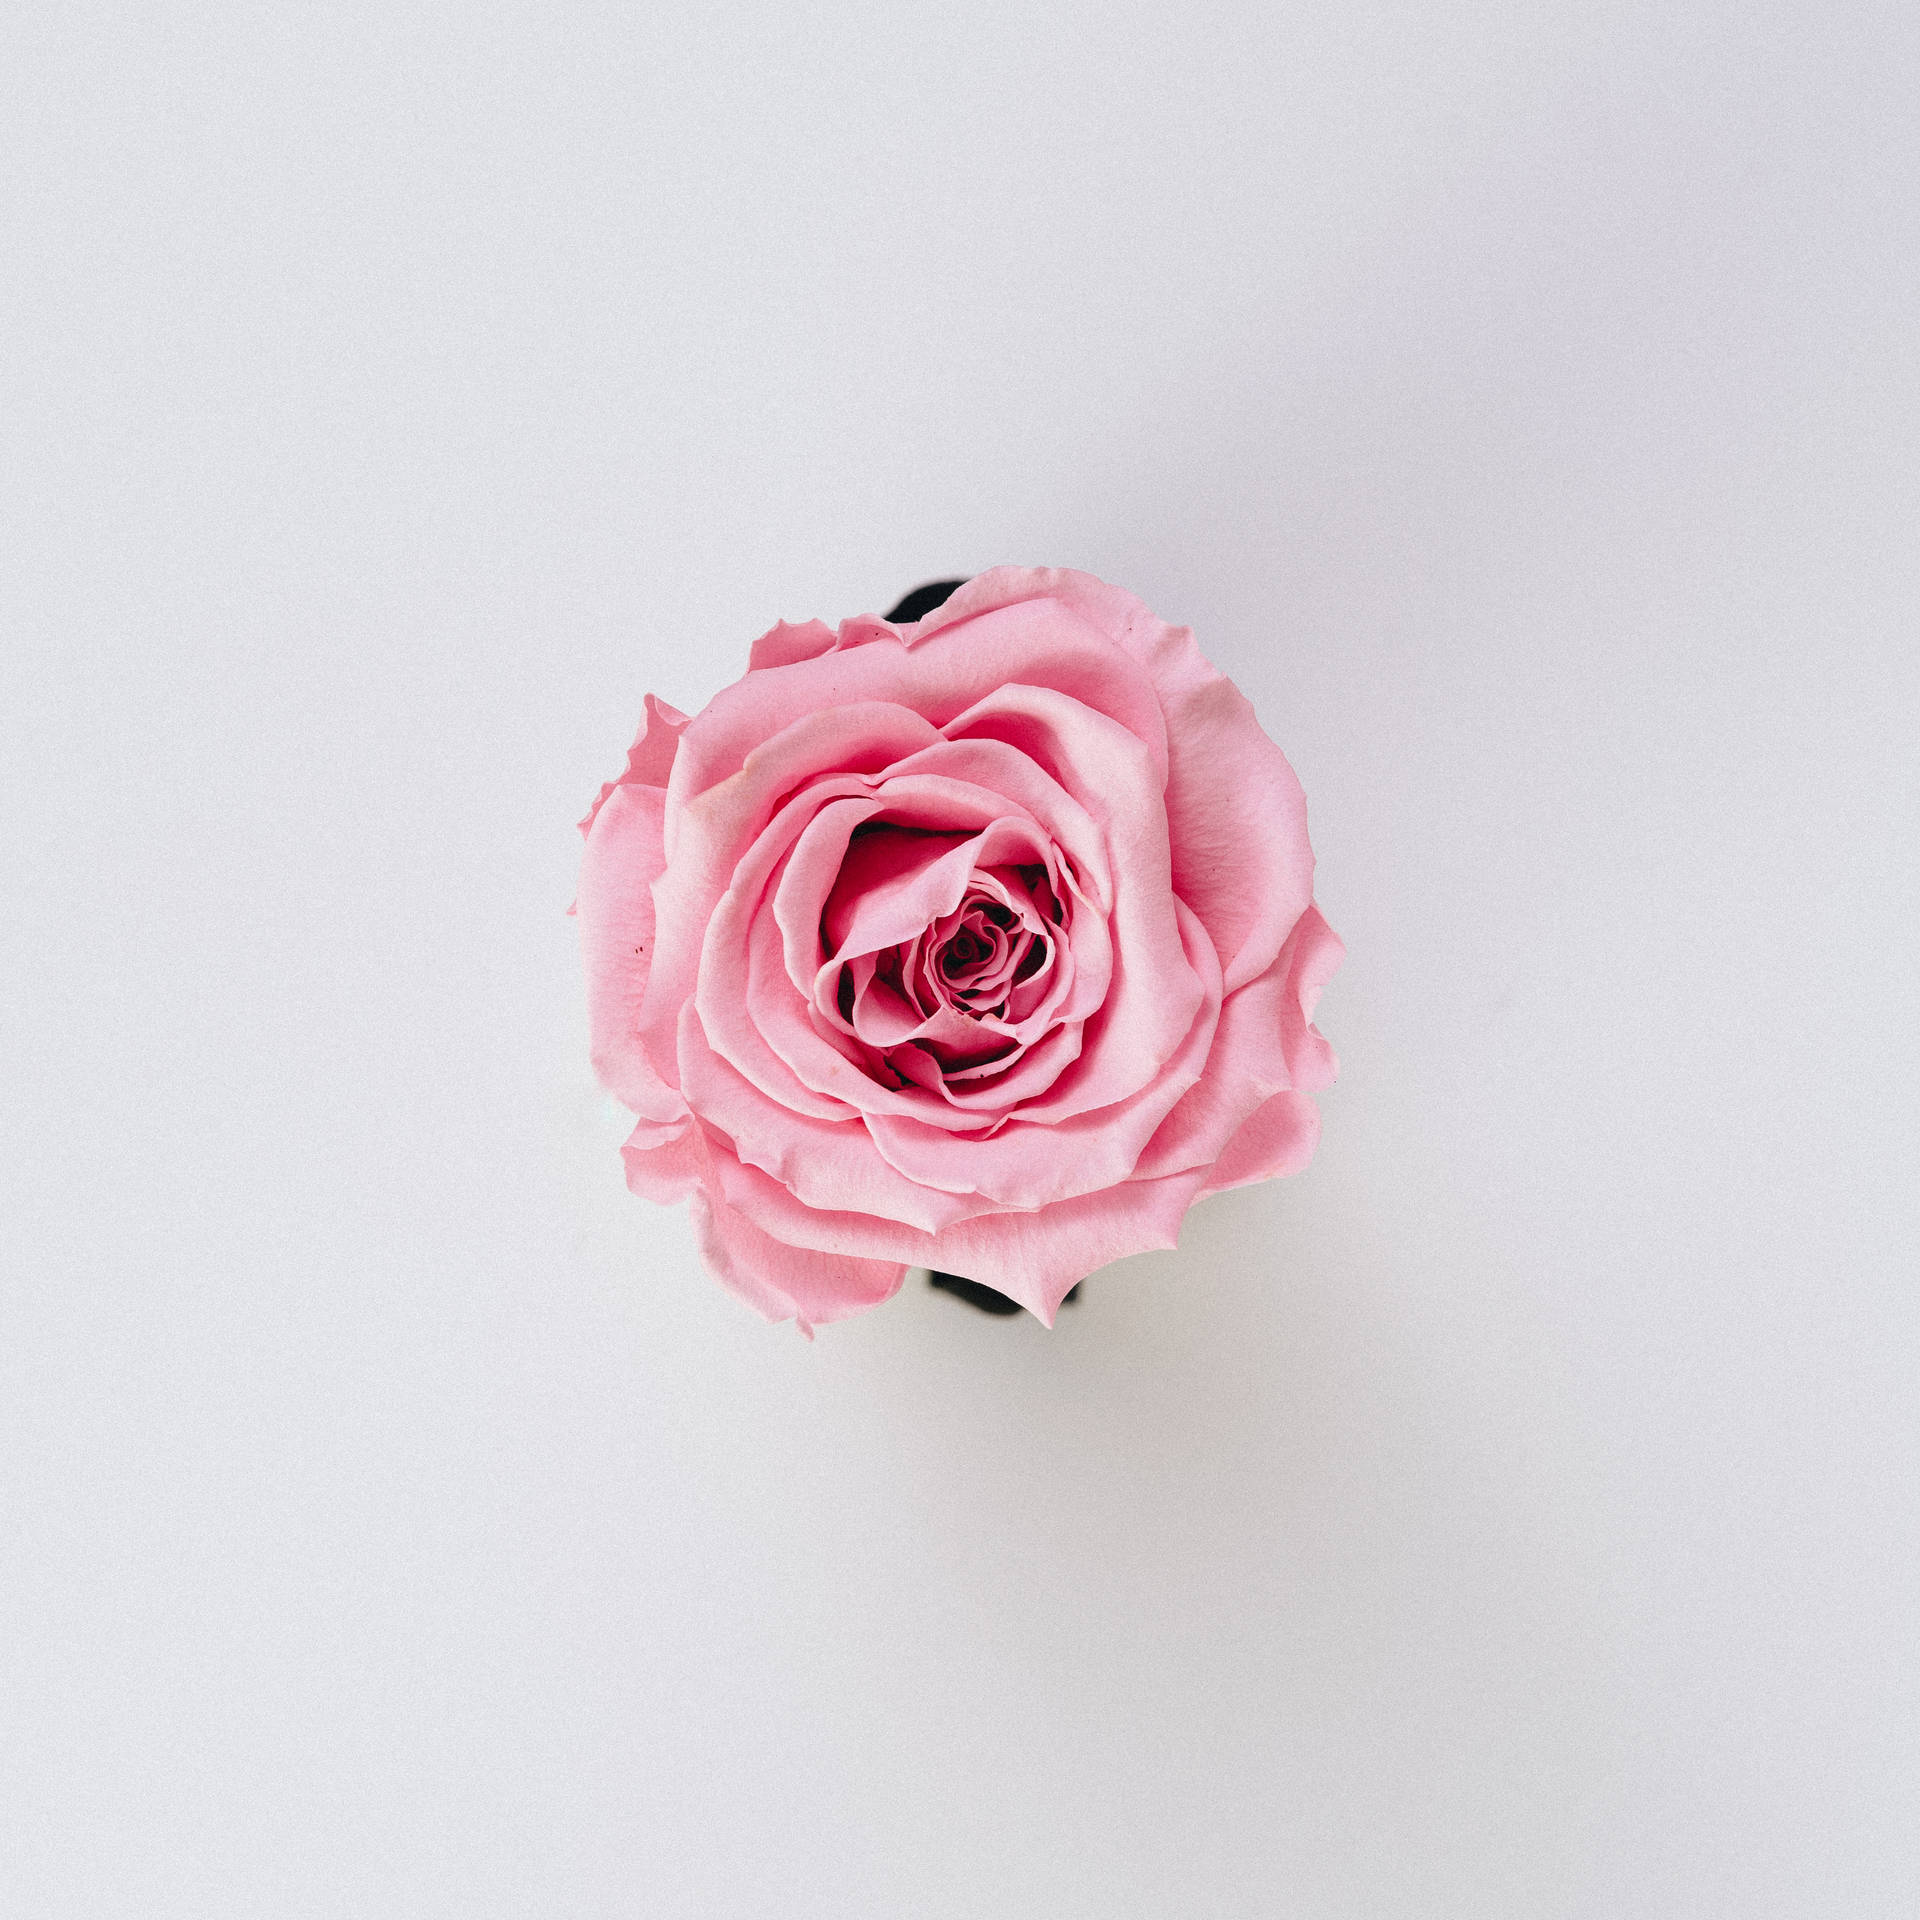 3715X3715 Rose Wallpaper and Background